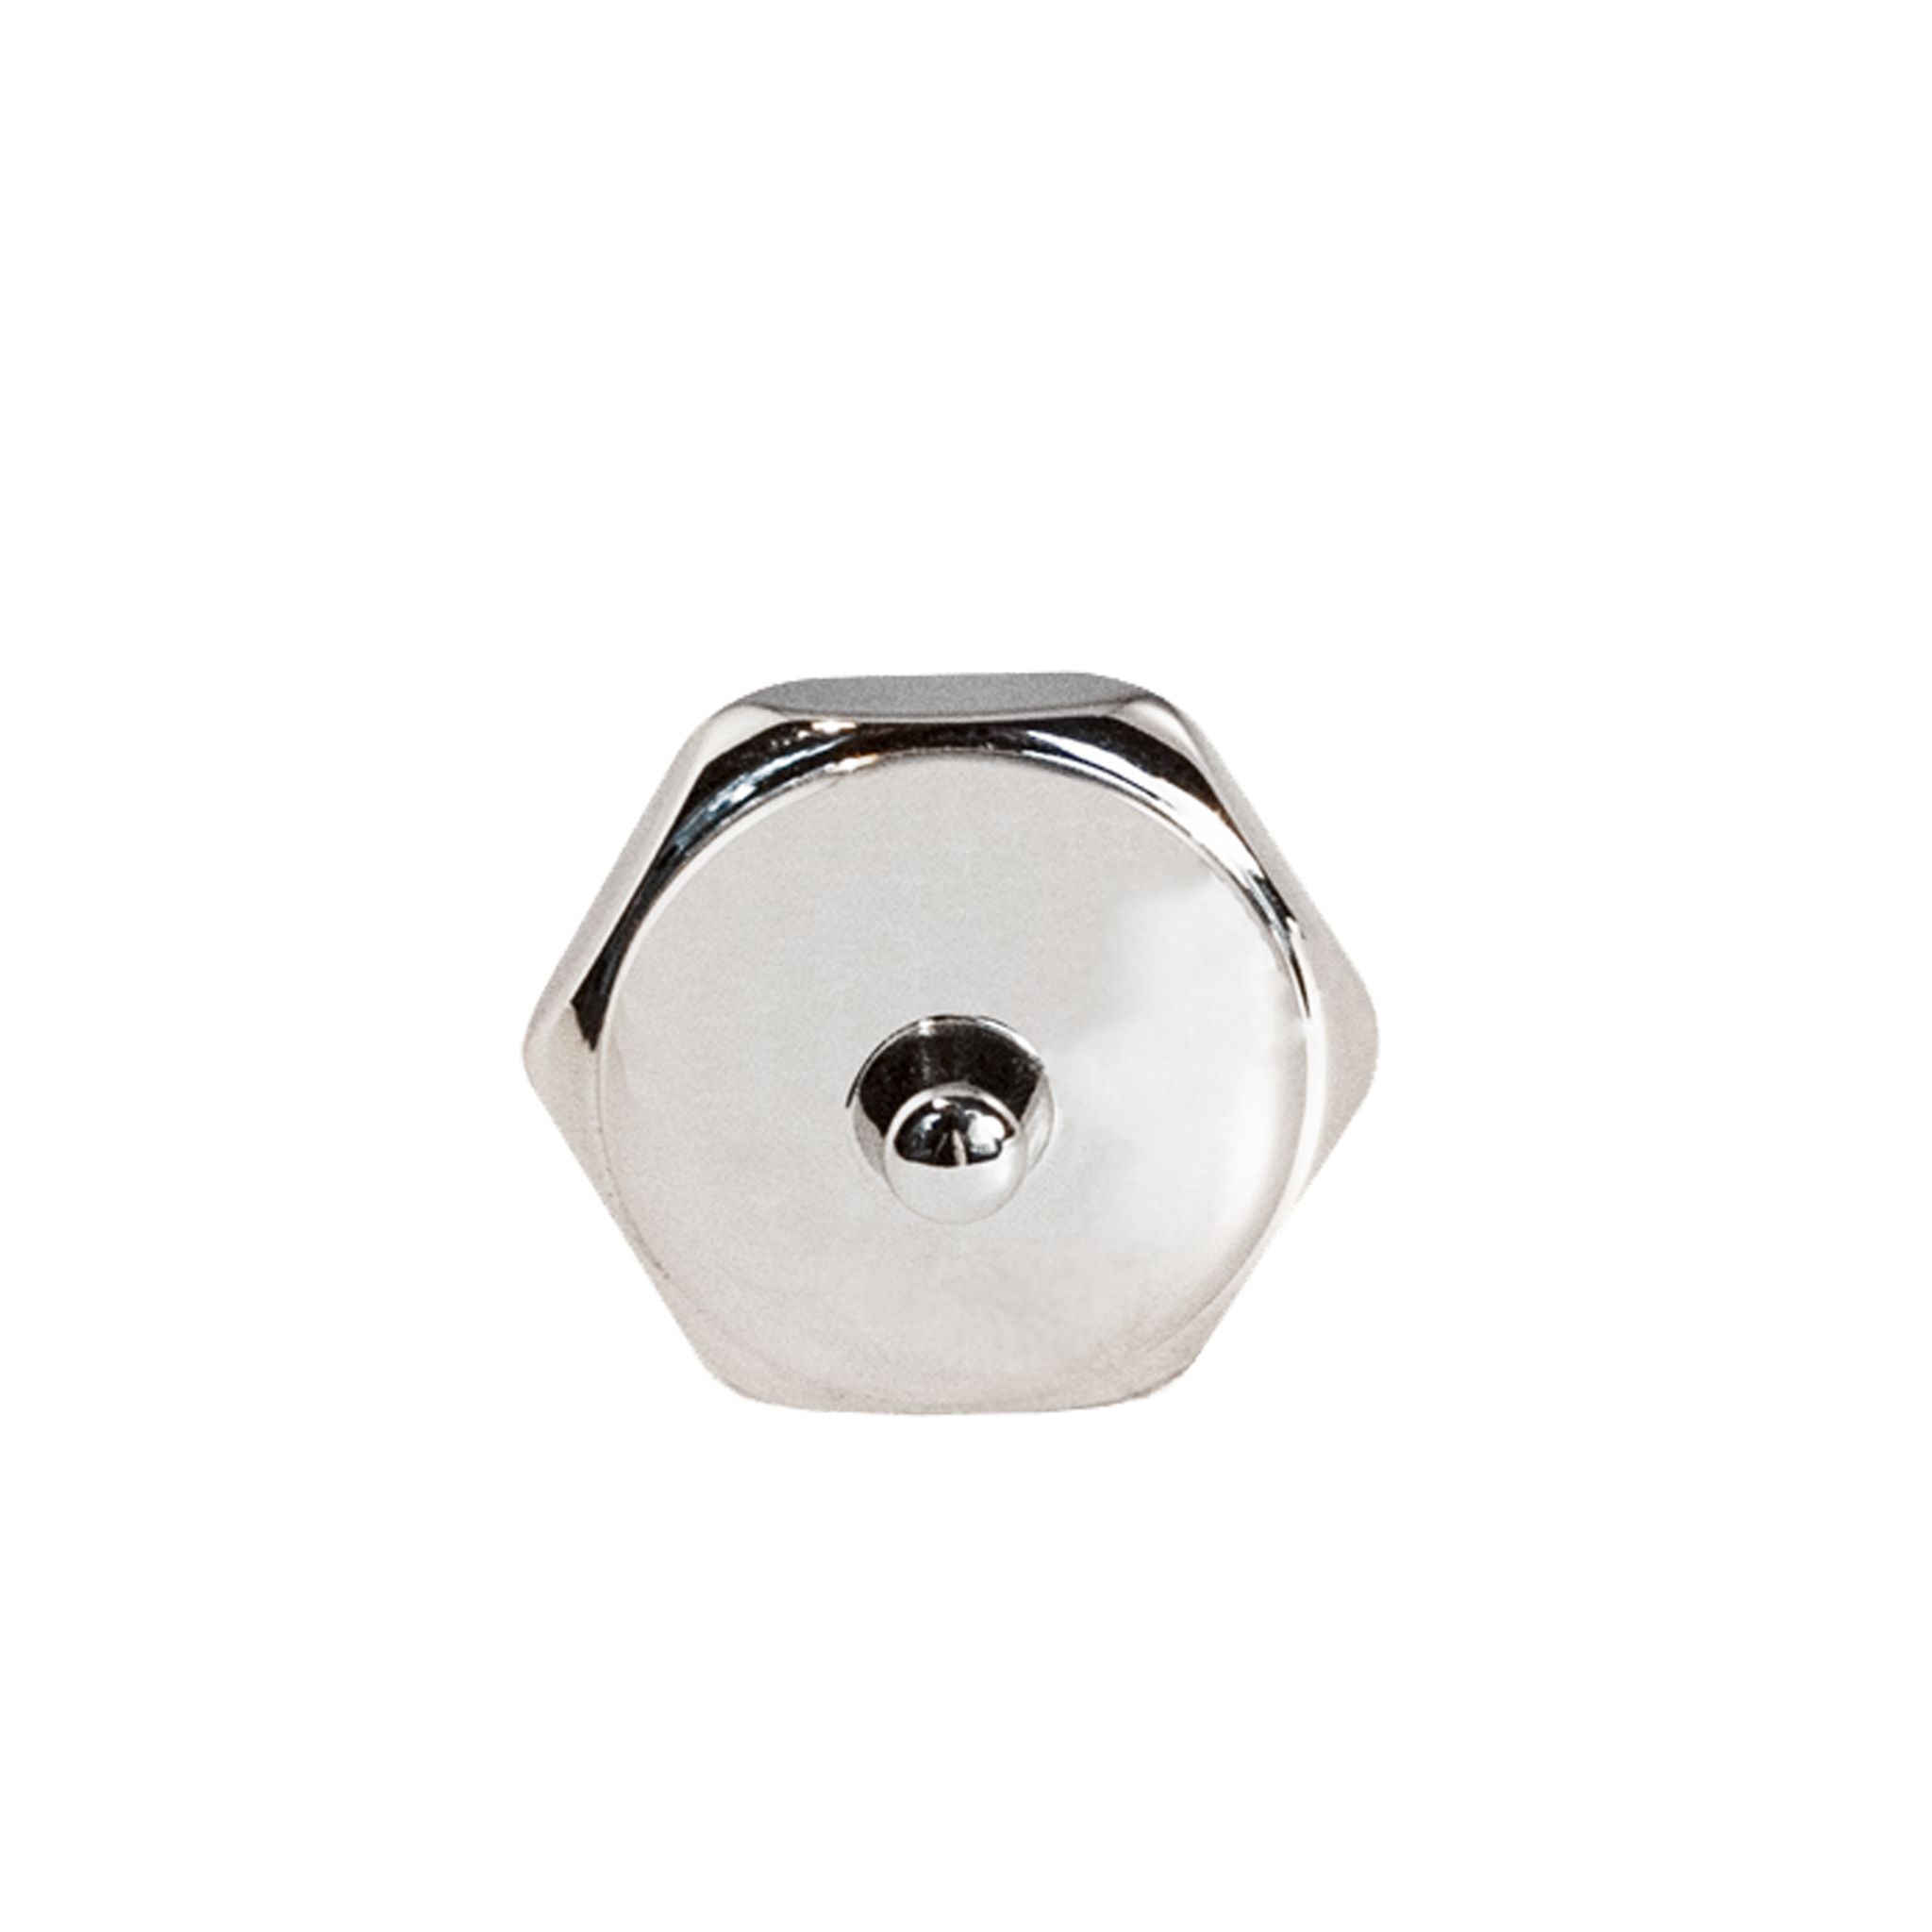 A polished hexagonal brass knob, designed for use on cabinets, drawers, and doors, featuring a modern and elegant look.